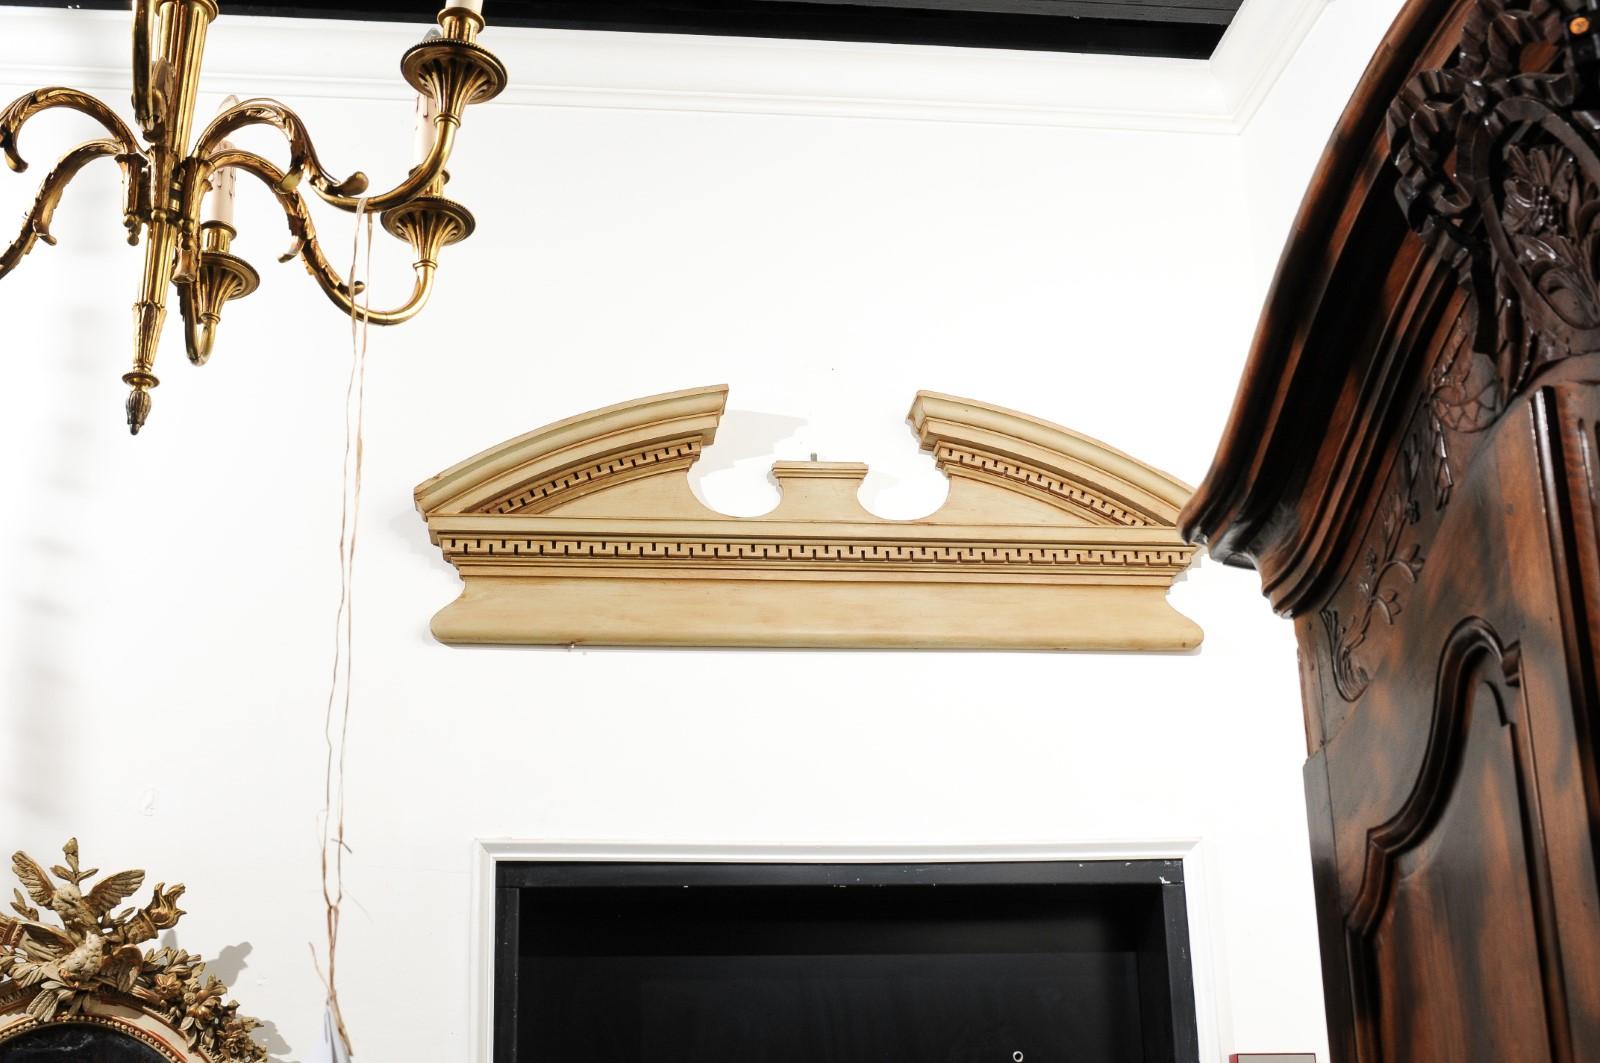 An English painted wood broken arch pediment from the late 19th century, with carved molding. Born in England during the later years of the 19th century, this exquisite architectural element features a broken arch silhouette, with curving, pierced